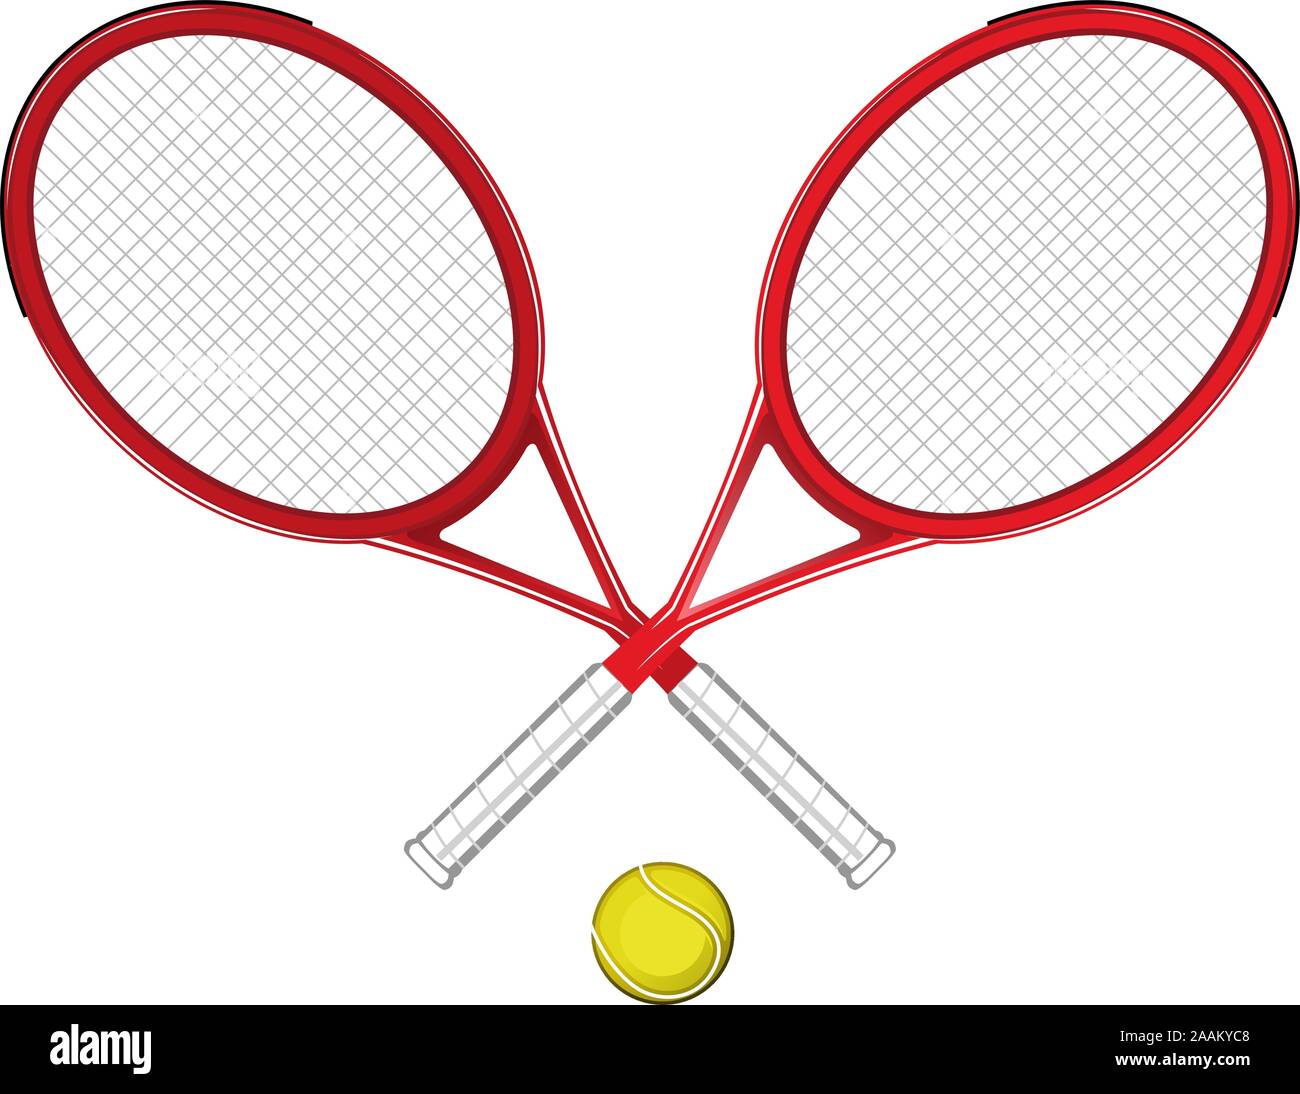 Two Tennis rackets with yellow ball sports equipment symbols vector illustration. Stock Vector